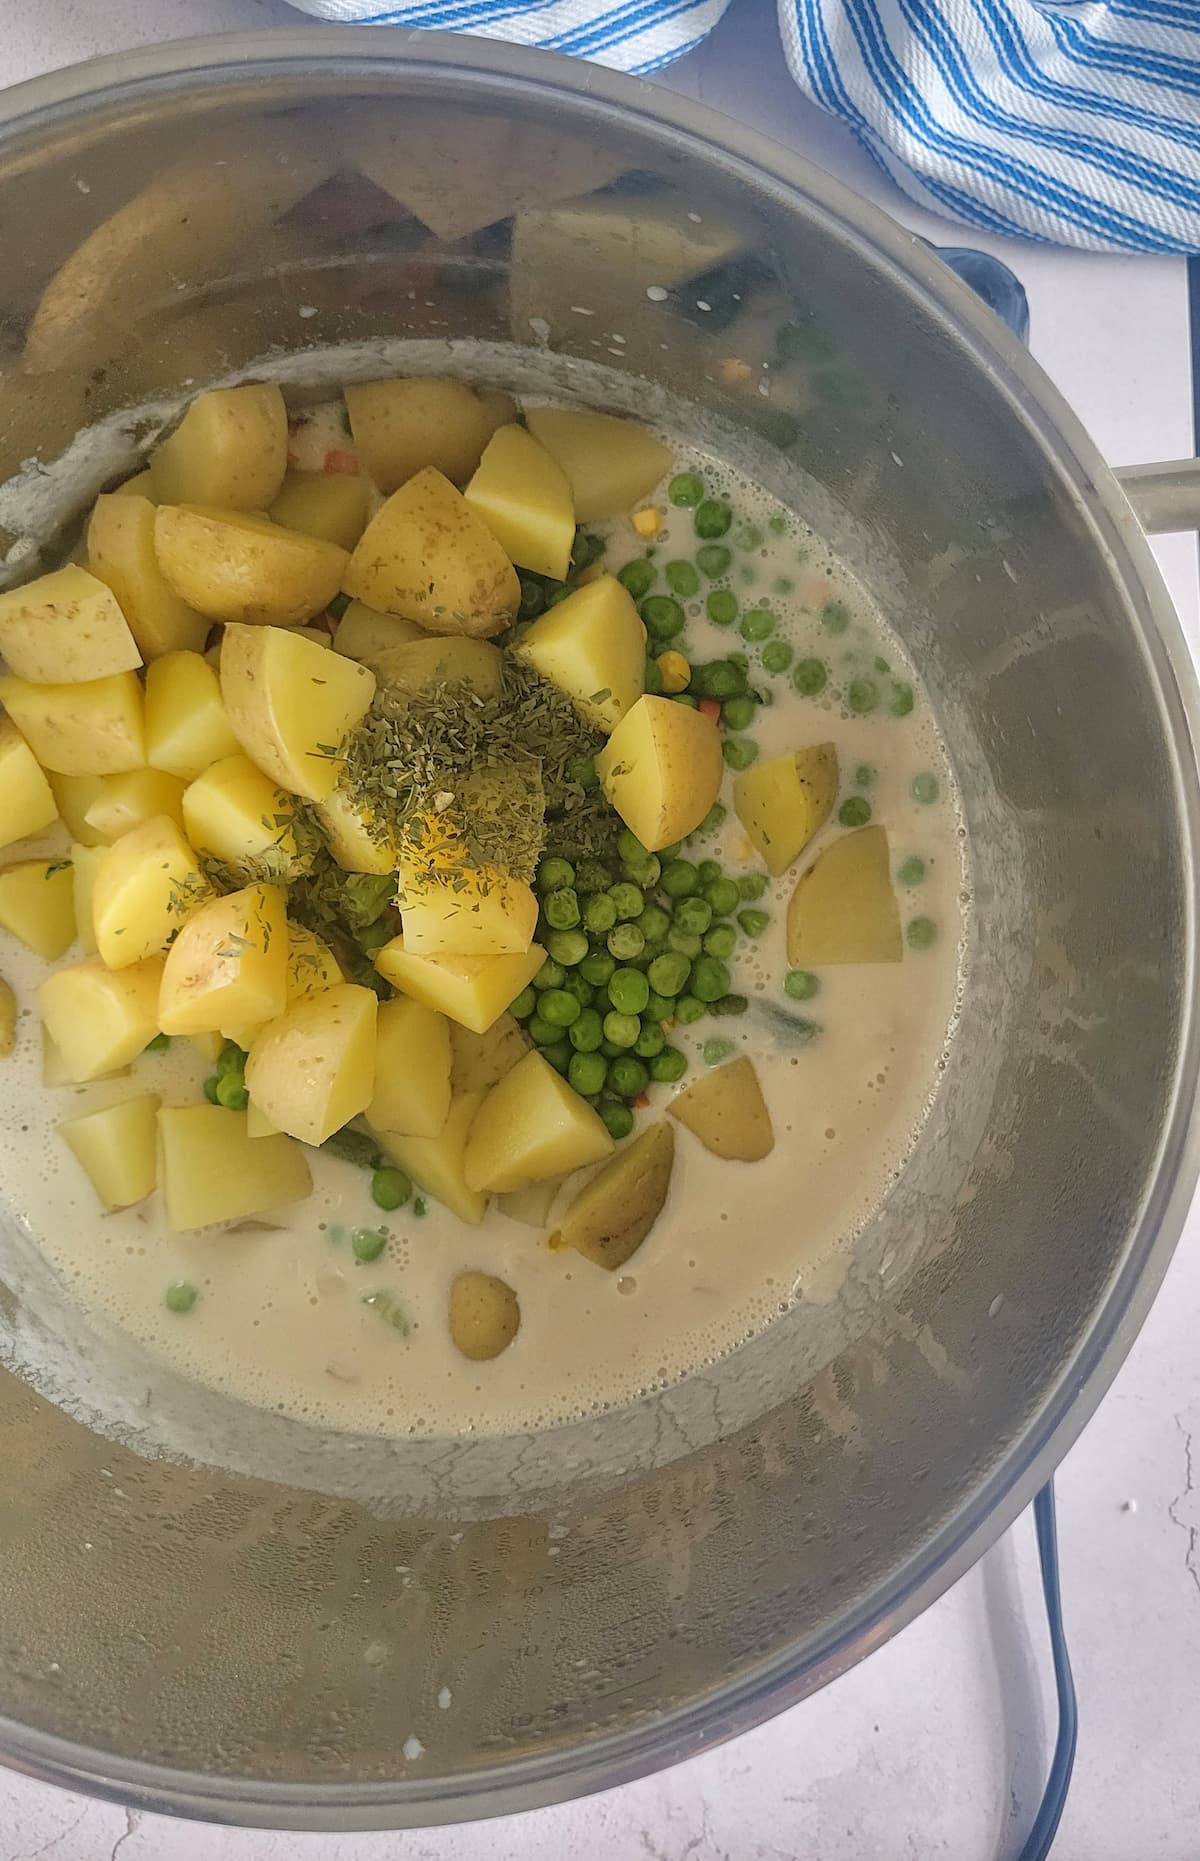 chunks of potatoes, peas and spices in a pot of cream